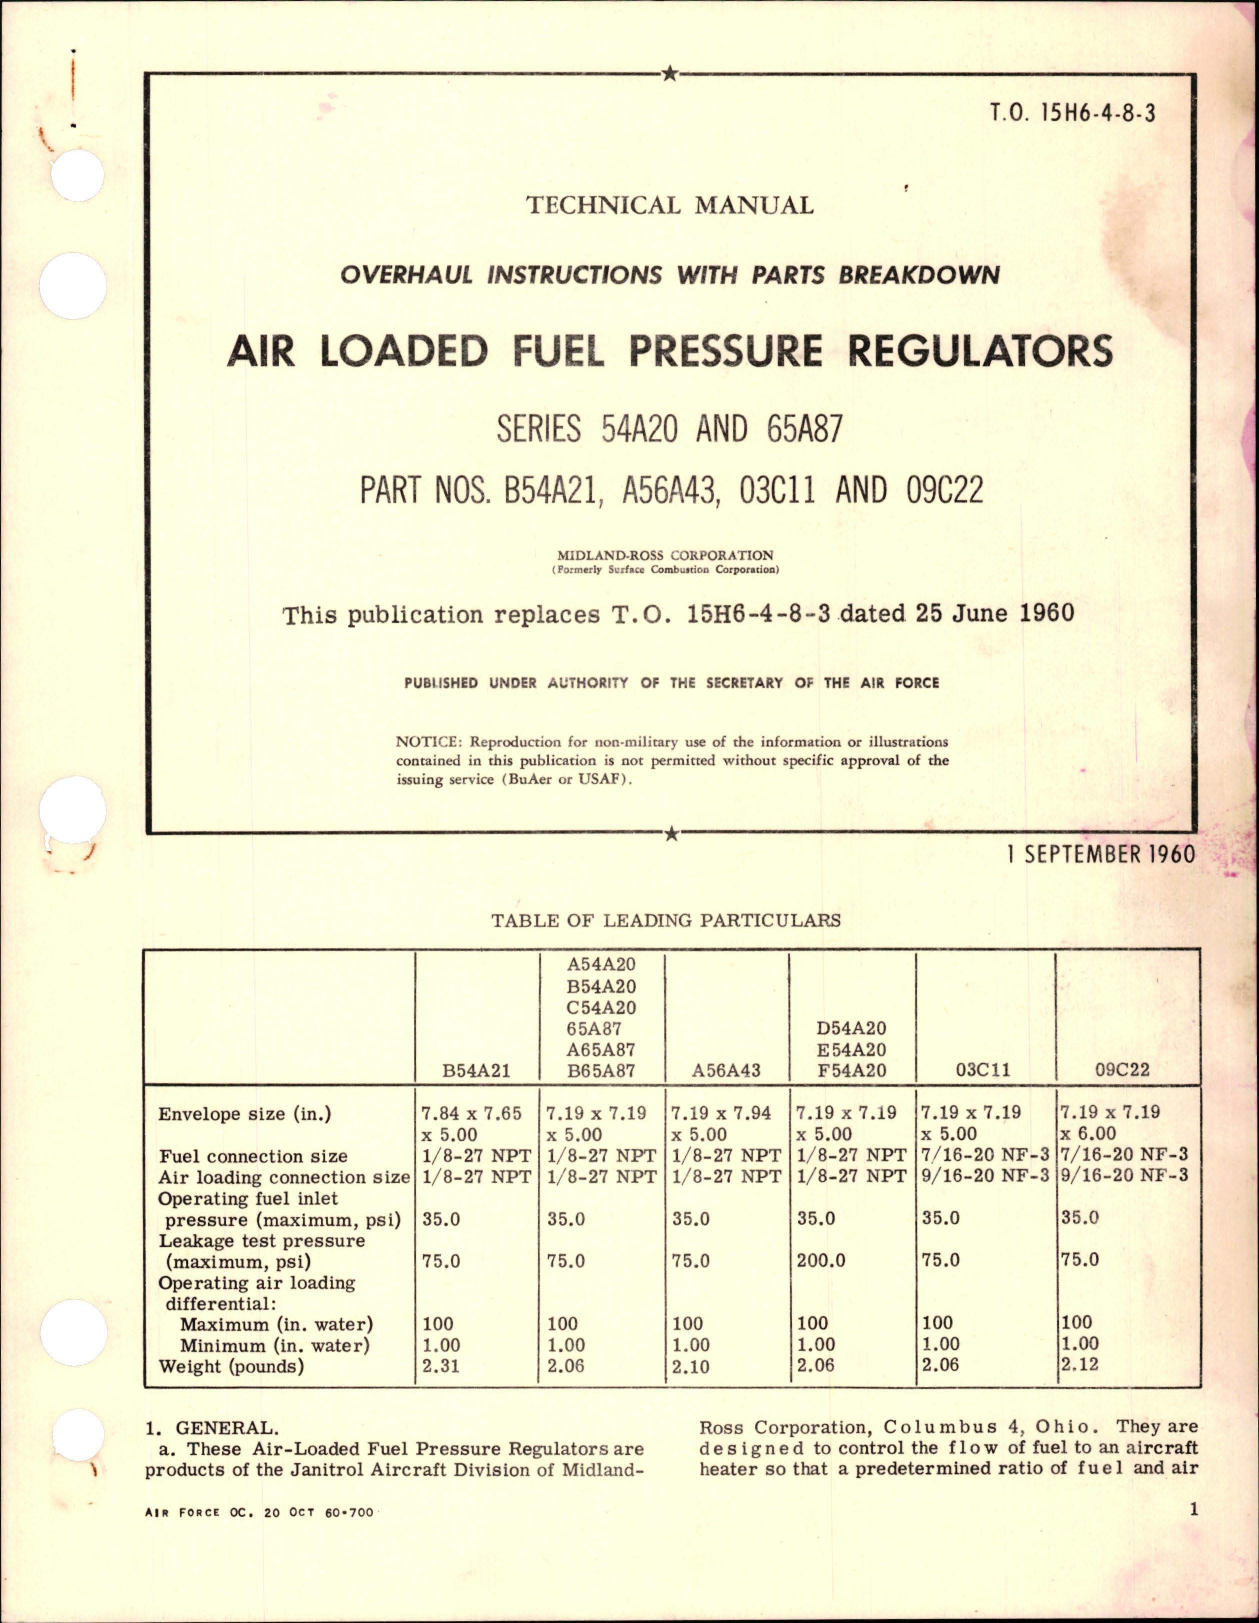 Sample page 1 from AirCorps Library document: Overhaul Instructions with Parts Breakdown for Air Loaded Fuel Pressure Regulators - Series 54A20 and 65A87 